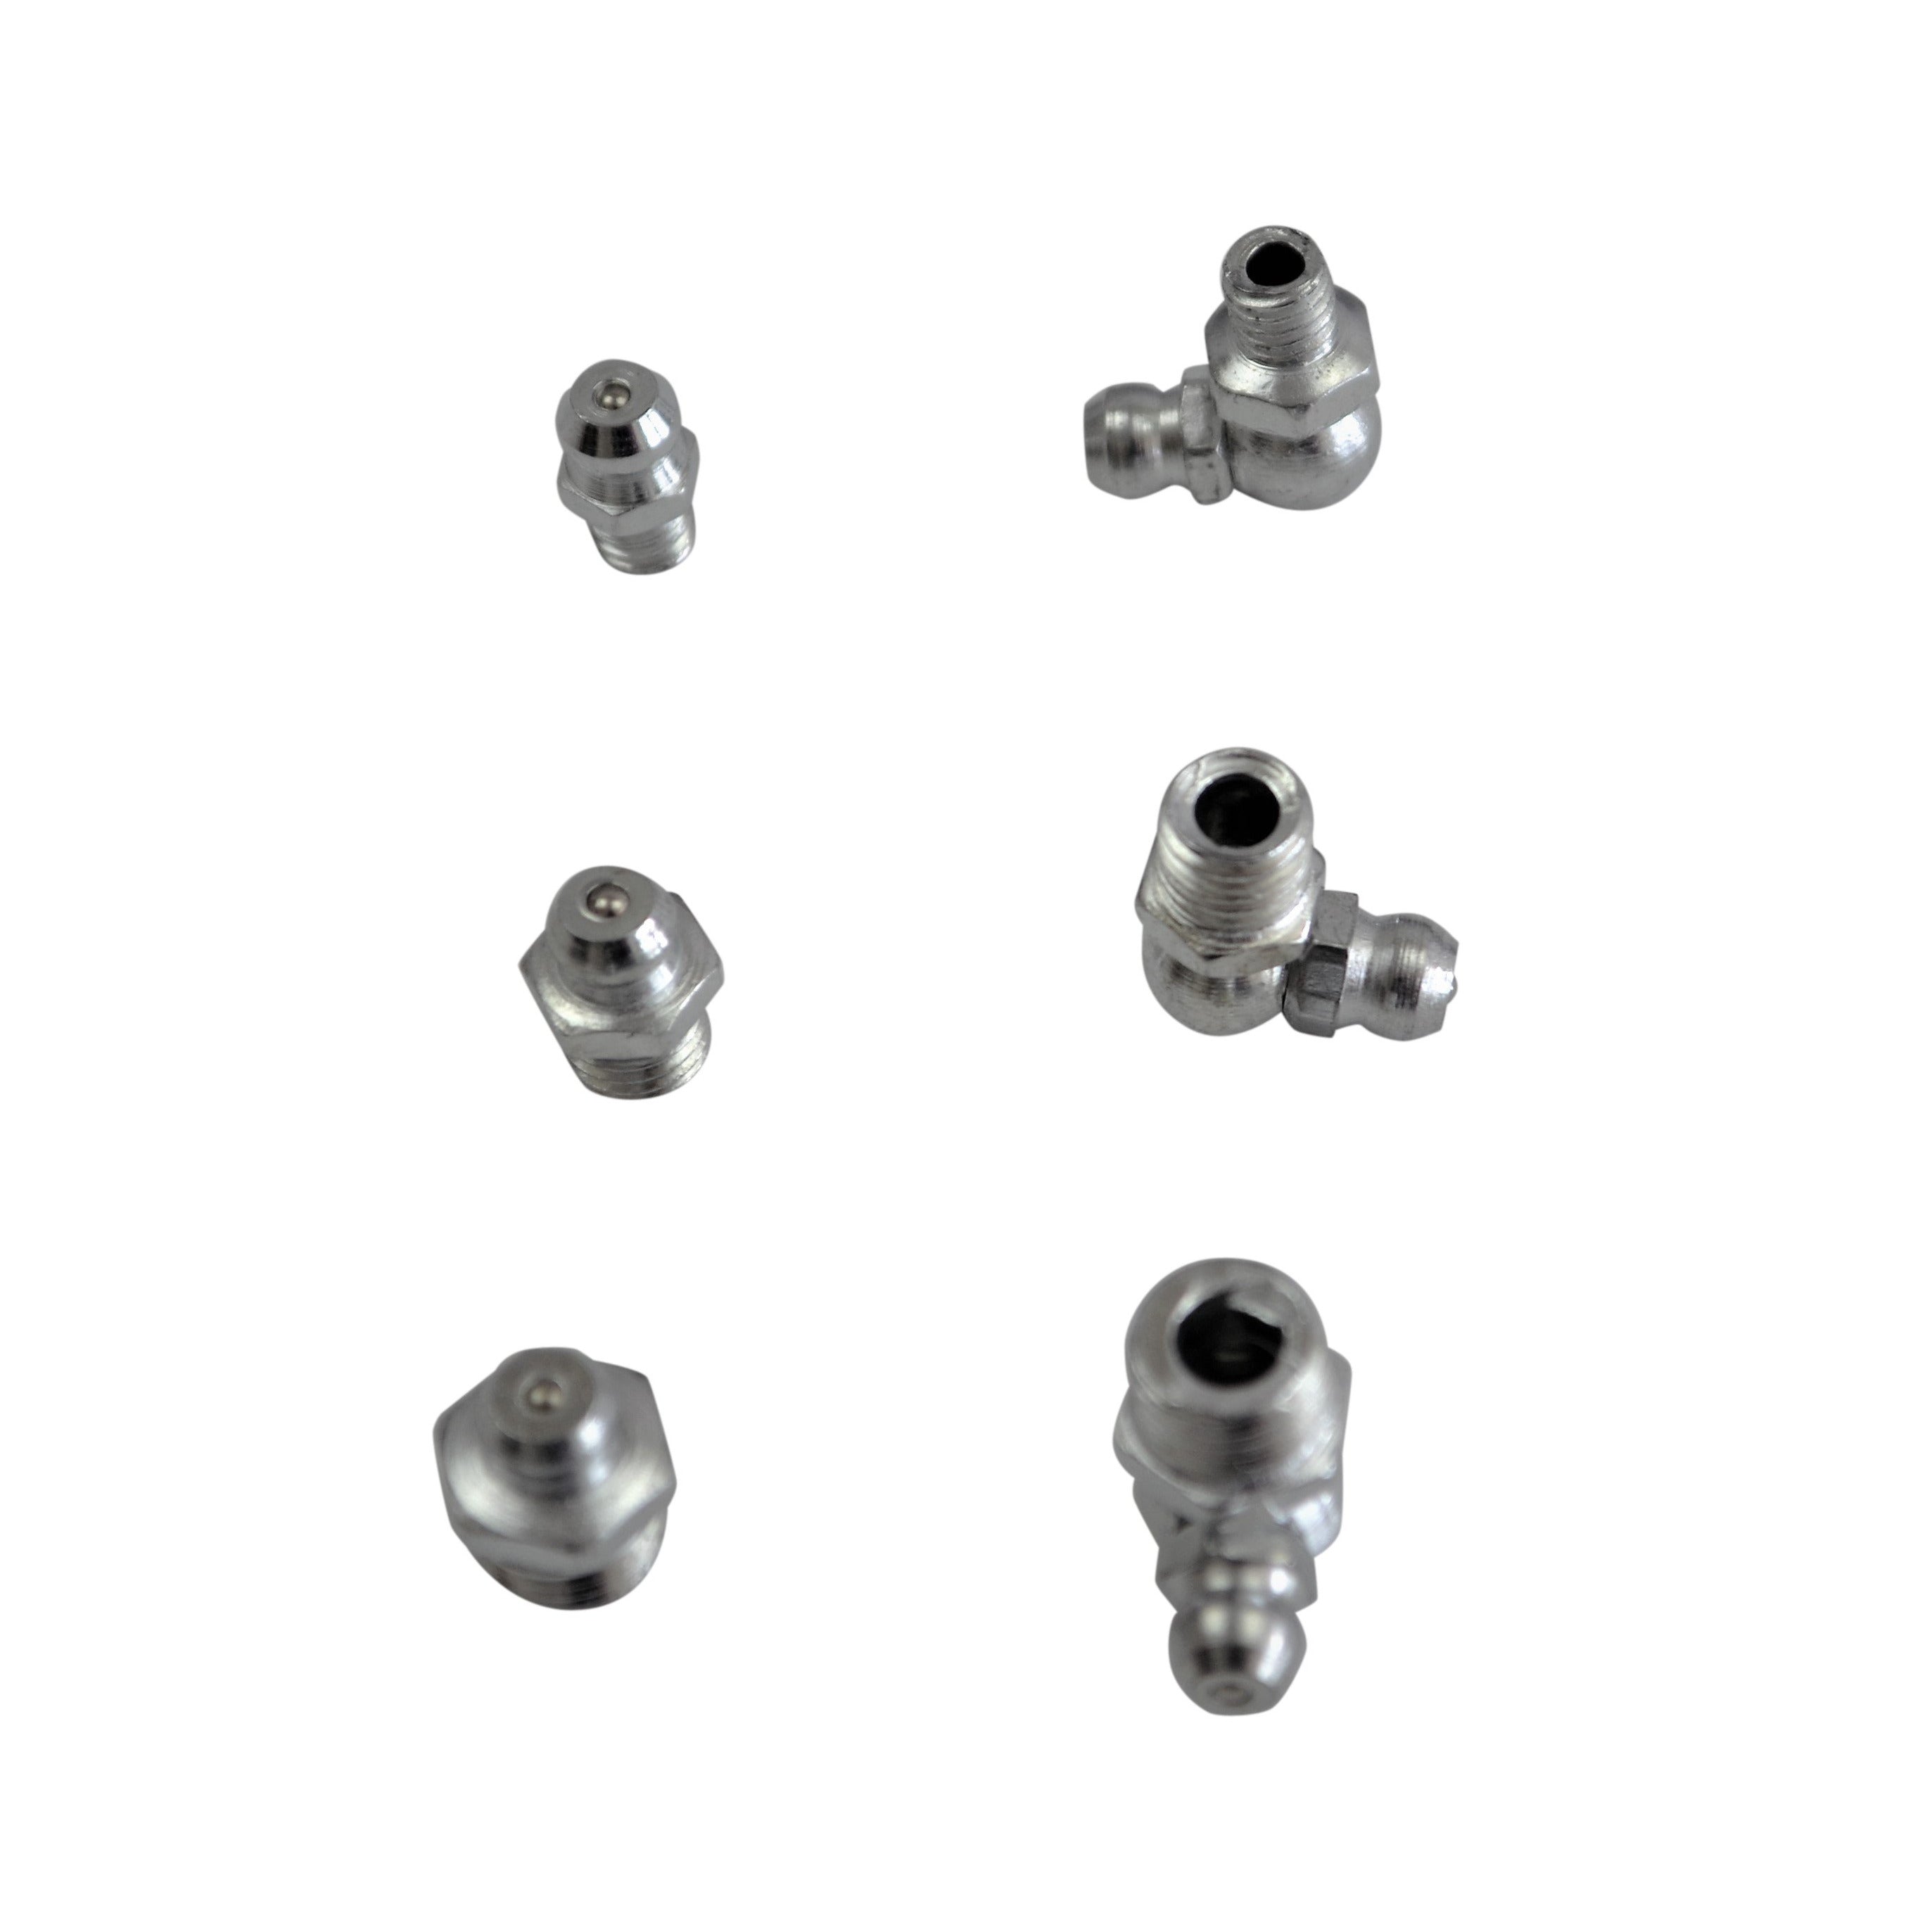 560pc grease nipples steel brass fittings imperial metric grease dust caps set accessories tool parts